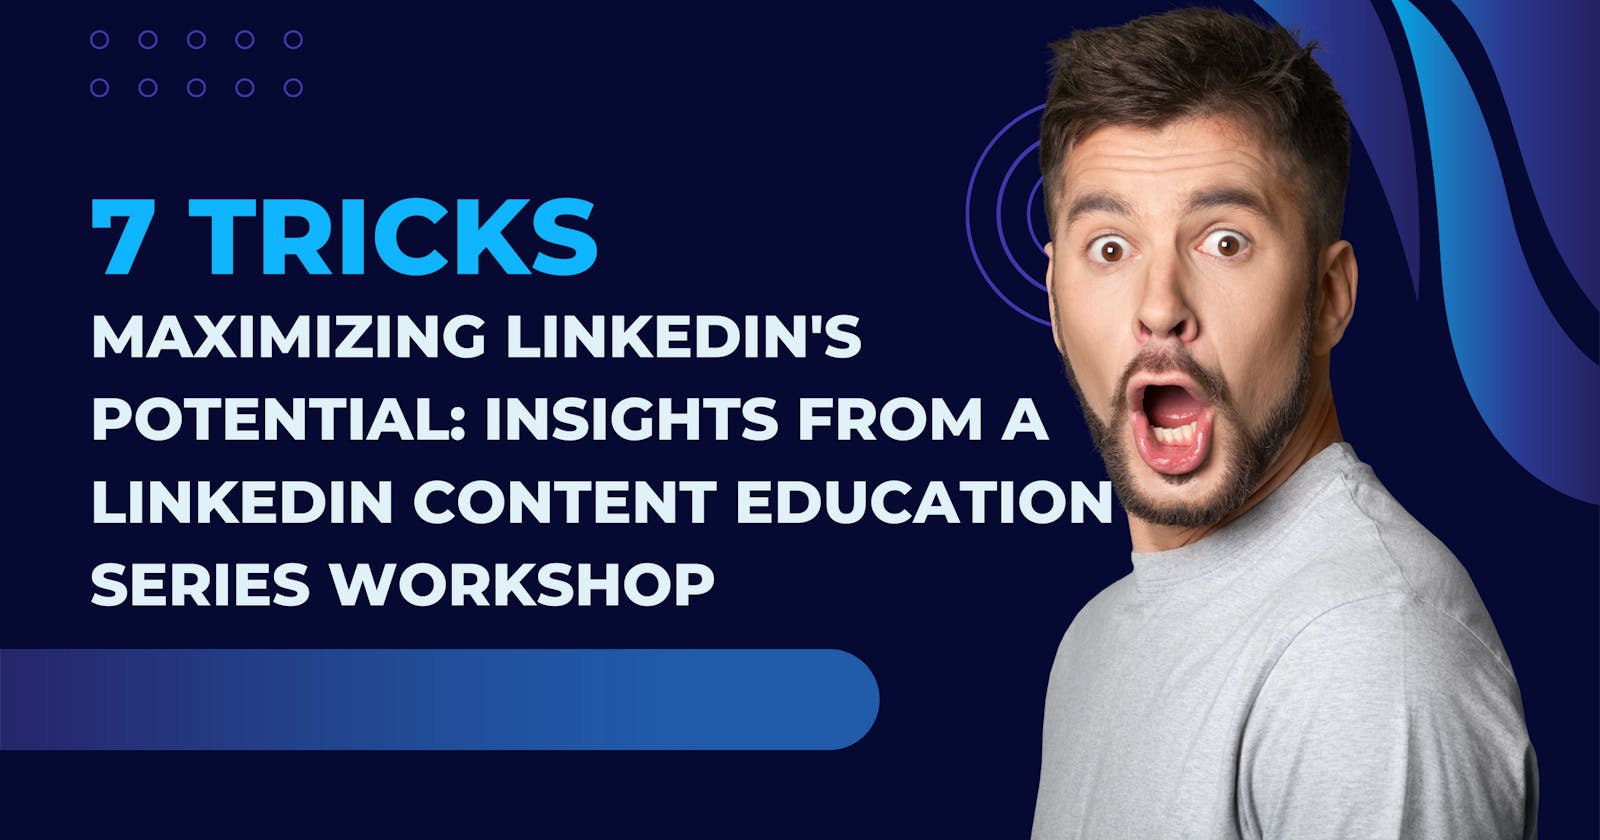 Maximizing LinkedIn's Potential: Insights from a LinkedIn Content Education Series Workshop